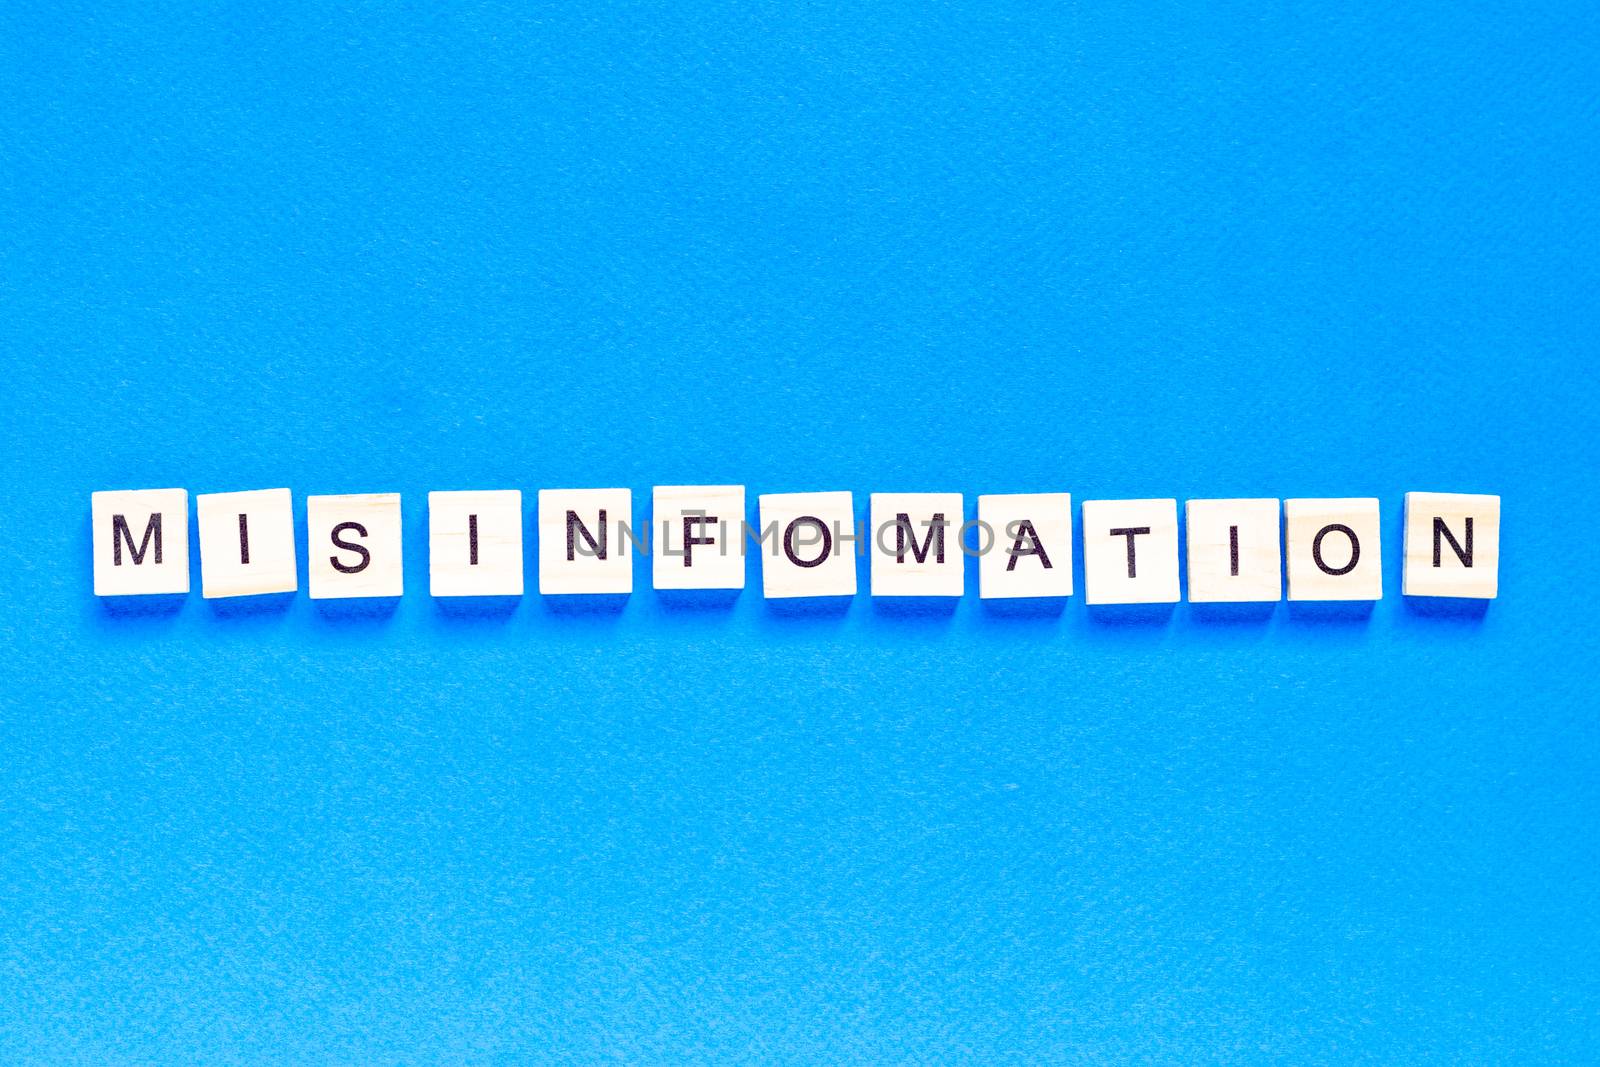 mystification written in wooden letters on a blue background, top view, deception, fake information, fake news, flat layout